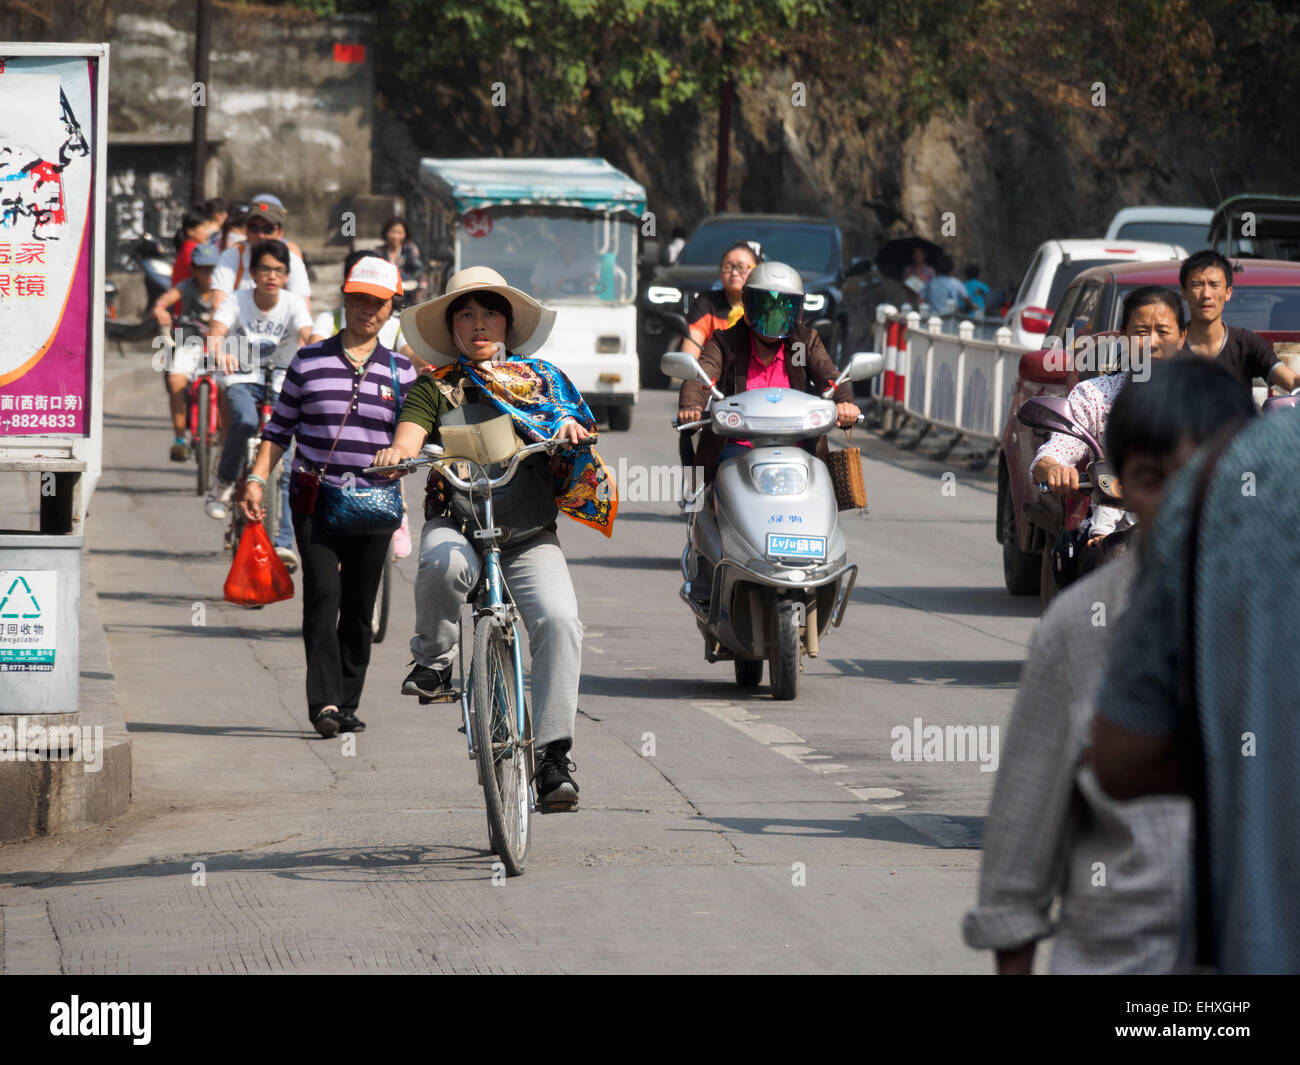 People riding bikes and motorized scooters on the streets of Yangshuo, China Stock Photo